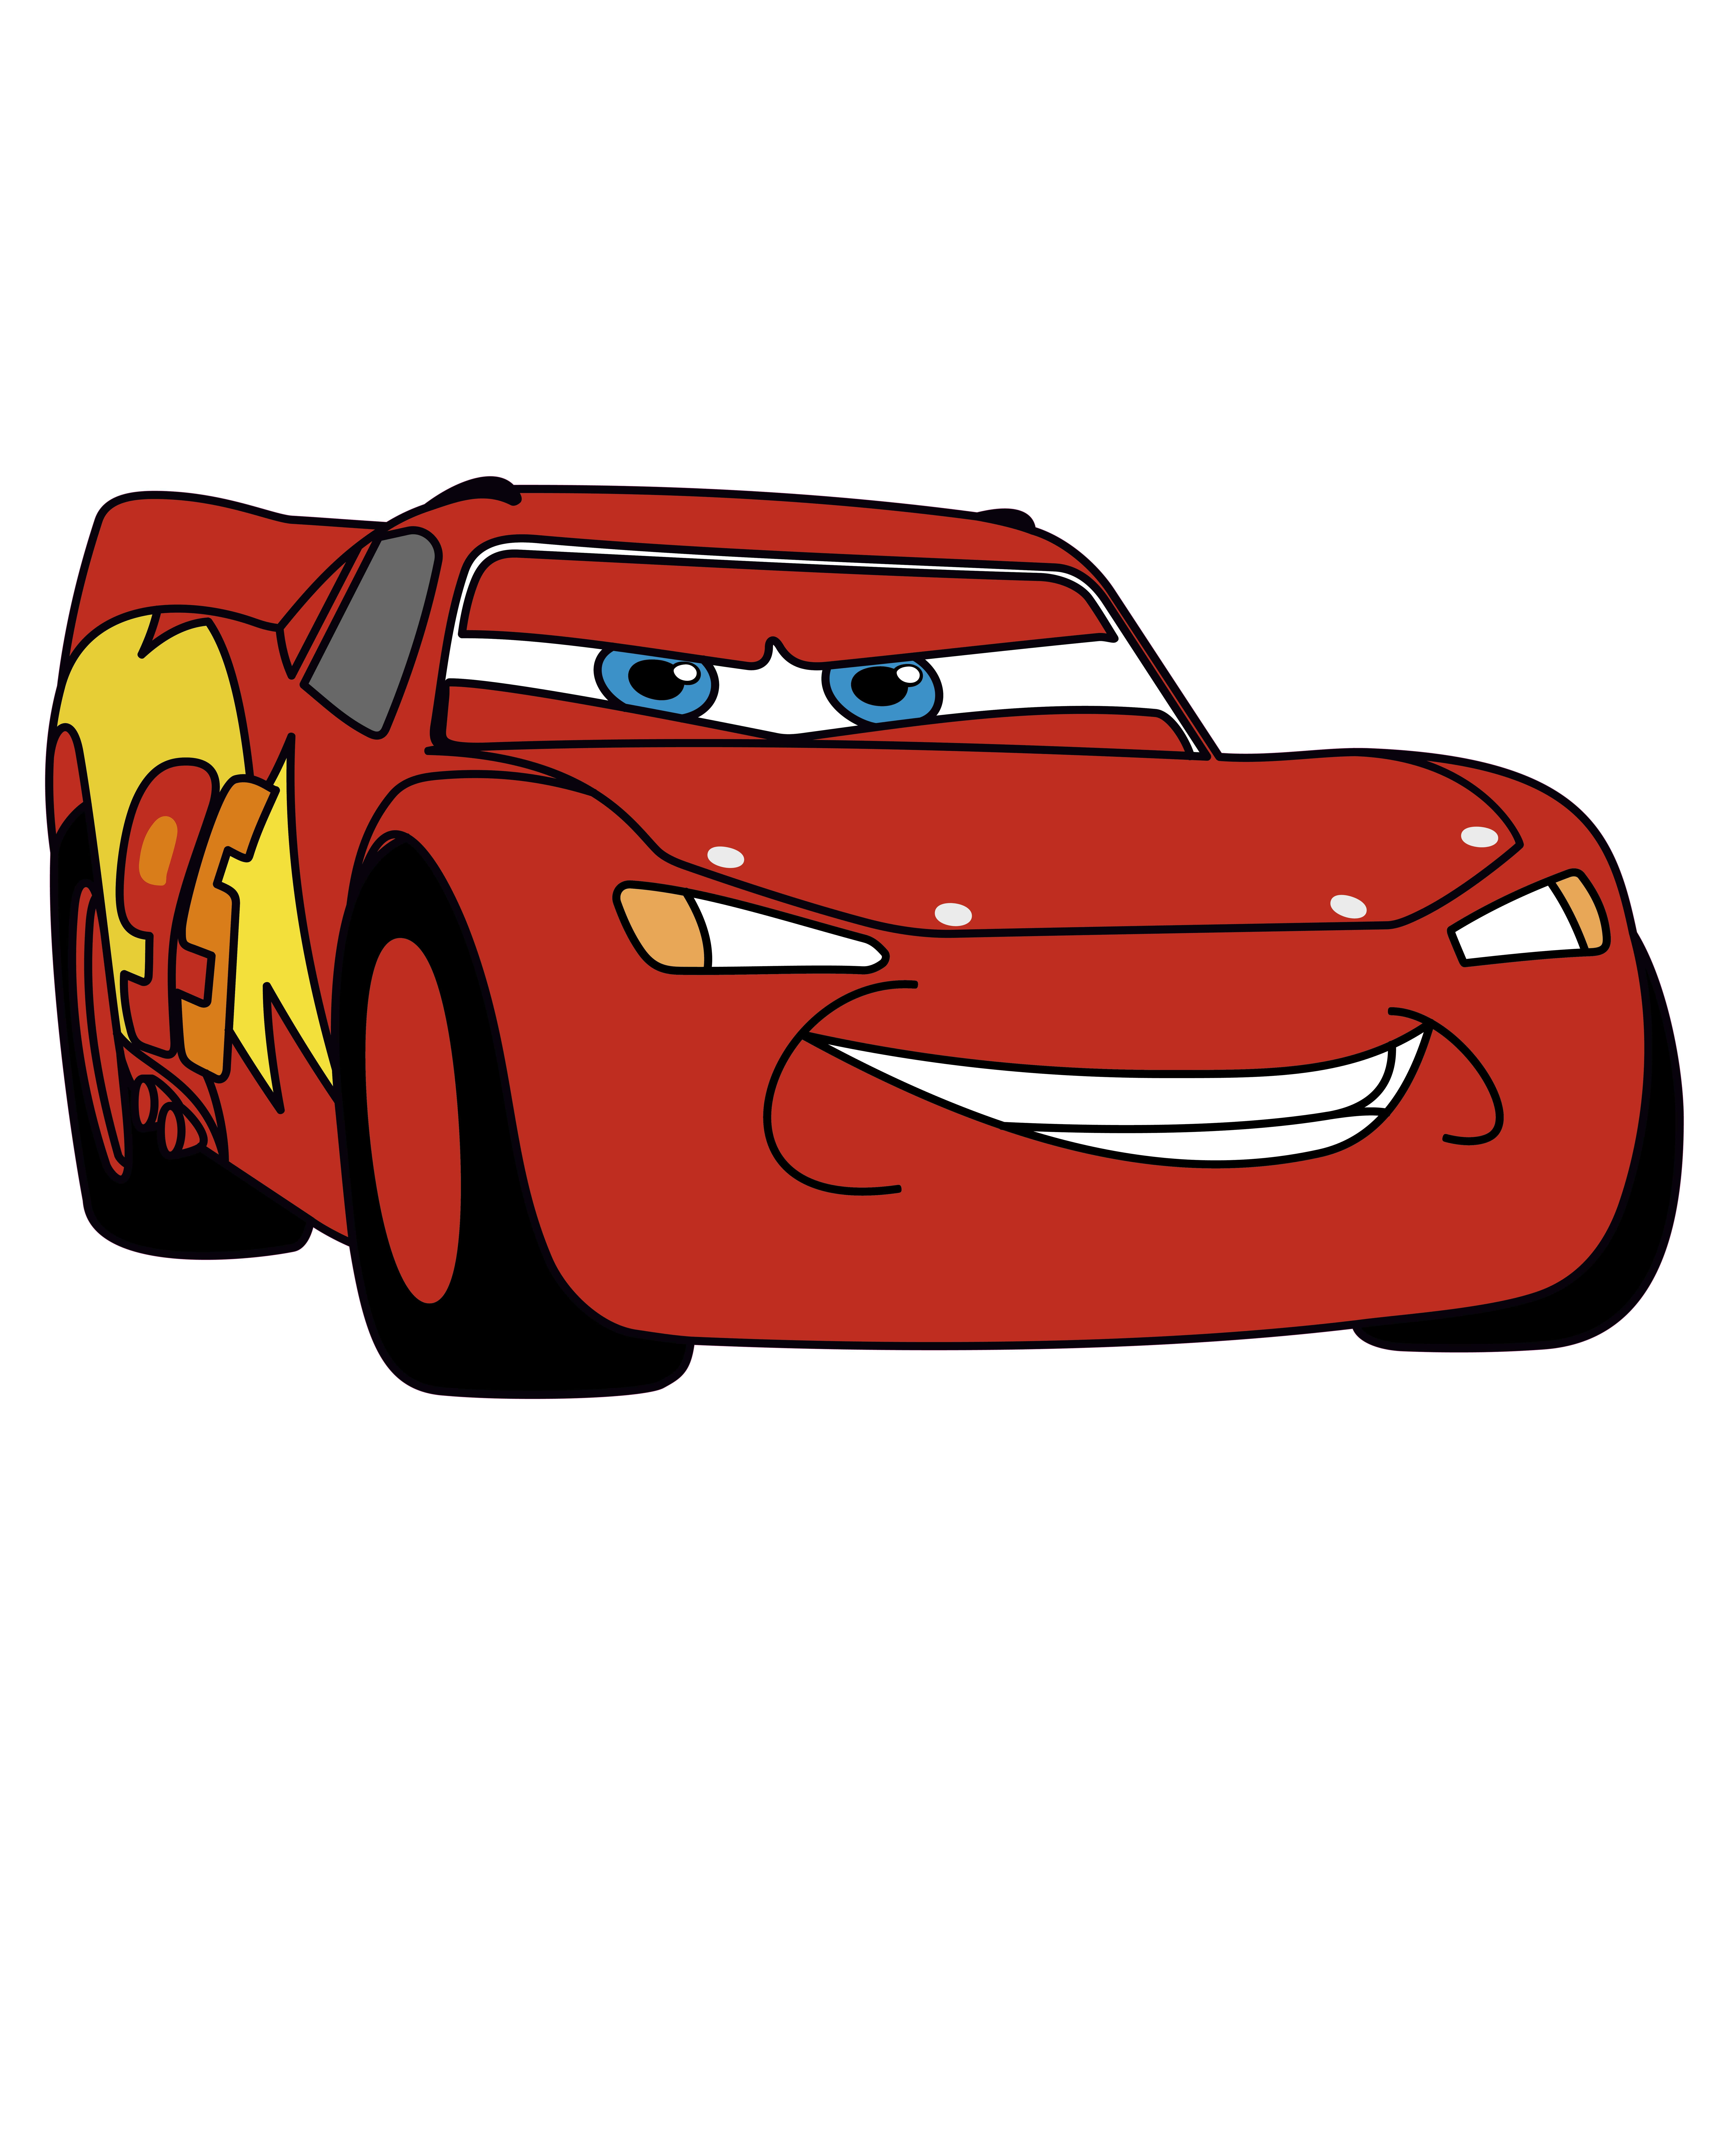 How to draw Cars 2? Drawing Lightning Mcqueen - Coloring Pages for Kids  Toddlers - Dailymotion Video